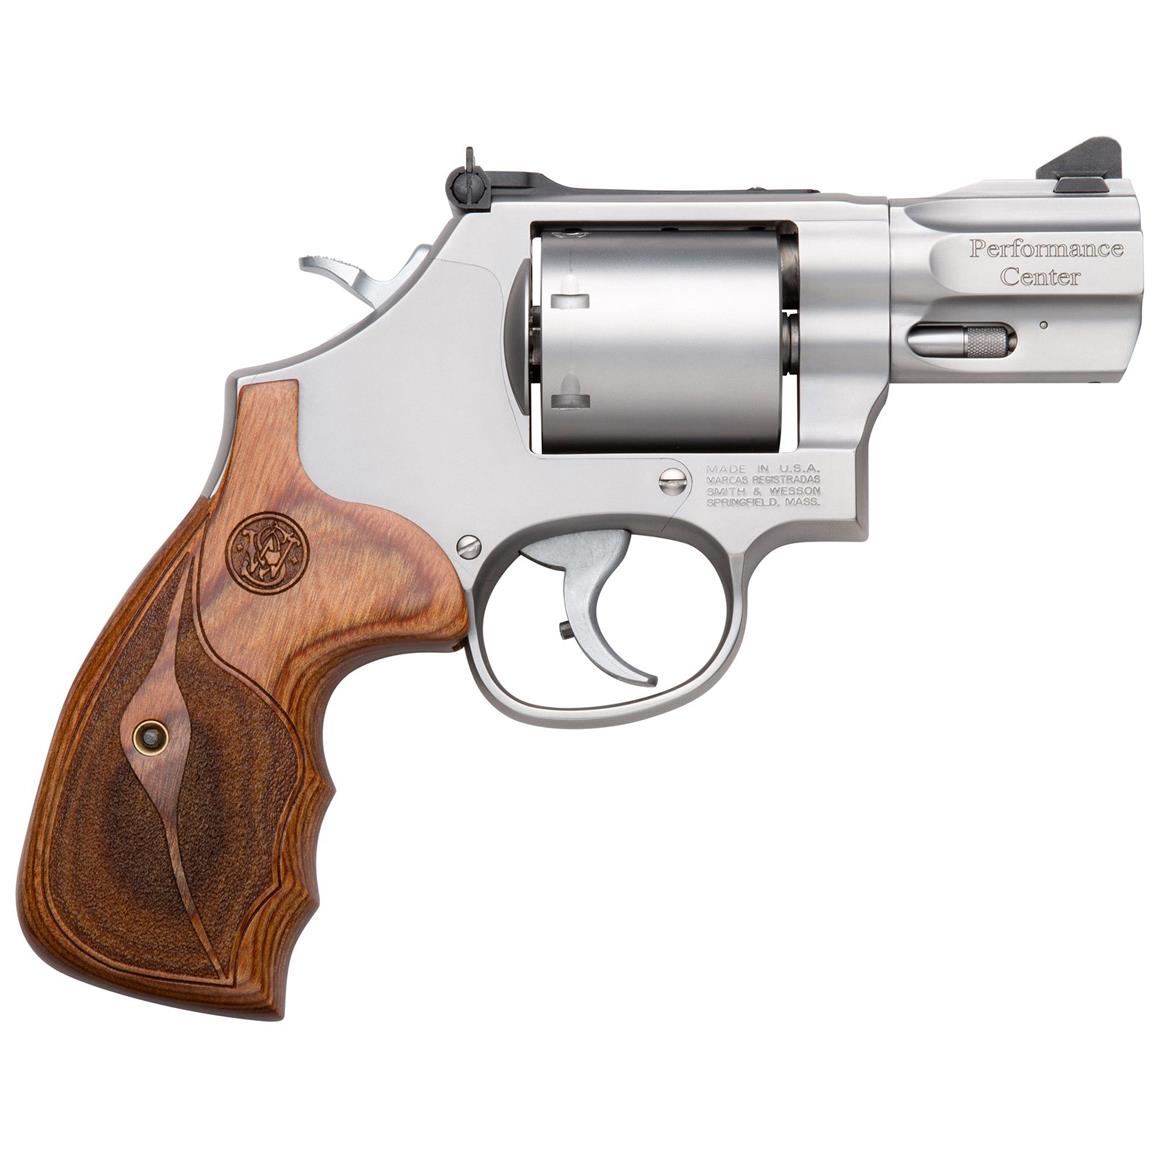 Smith Wesson Model 686 Revolver 357 Magnum 38 S W Special 2 5 Hot Sex Picture 6190